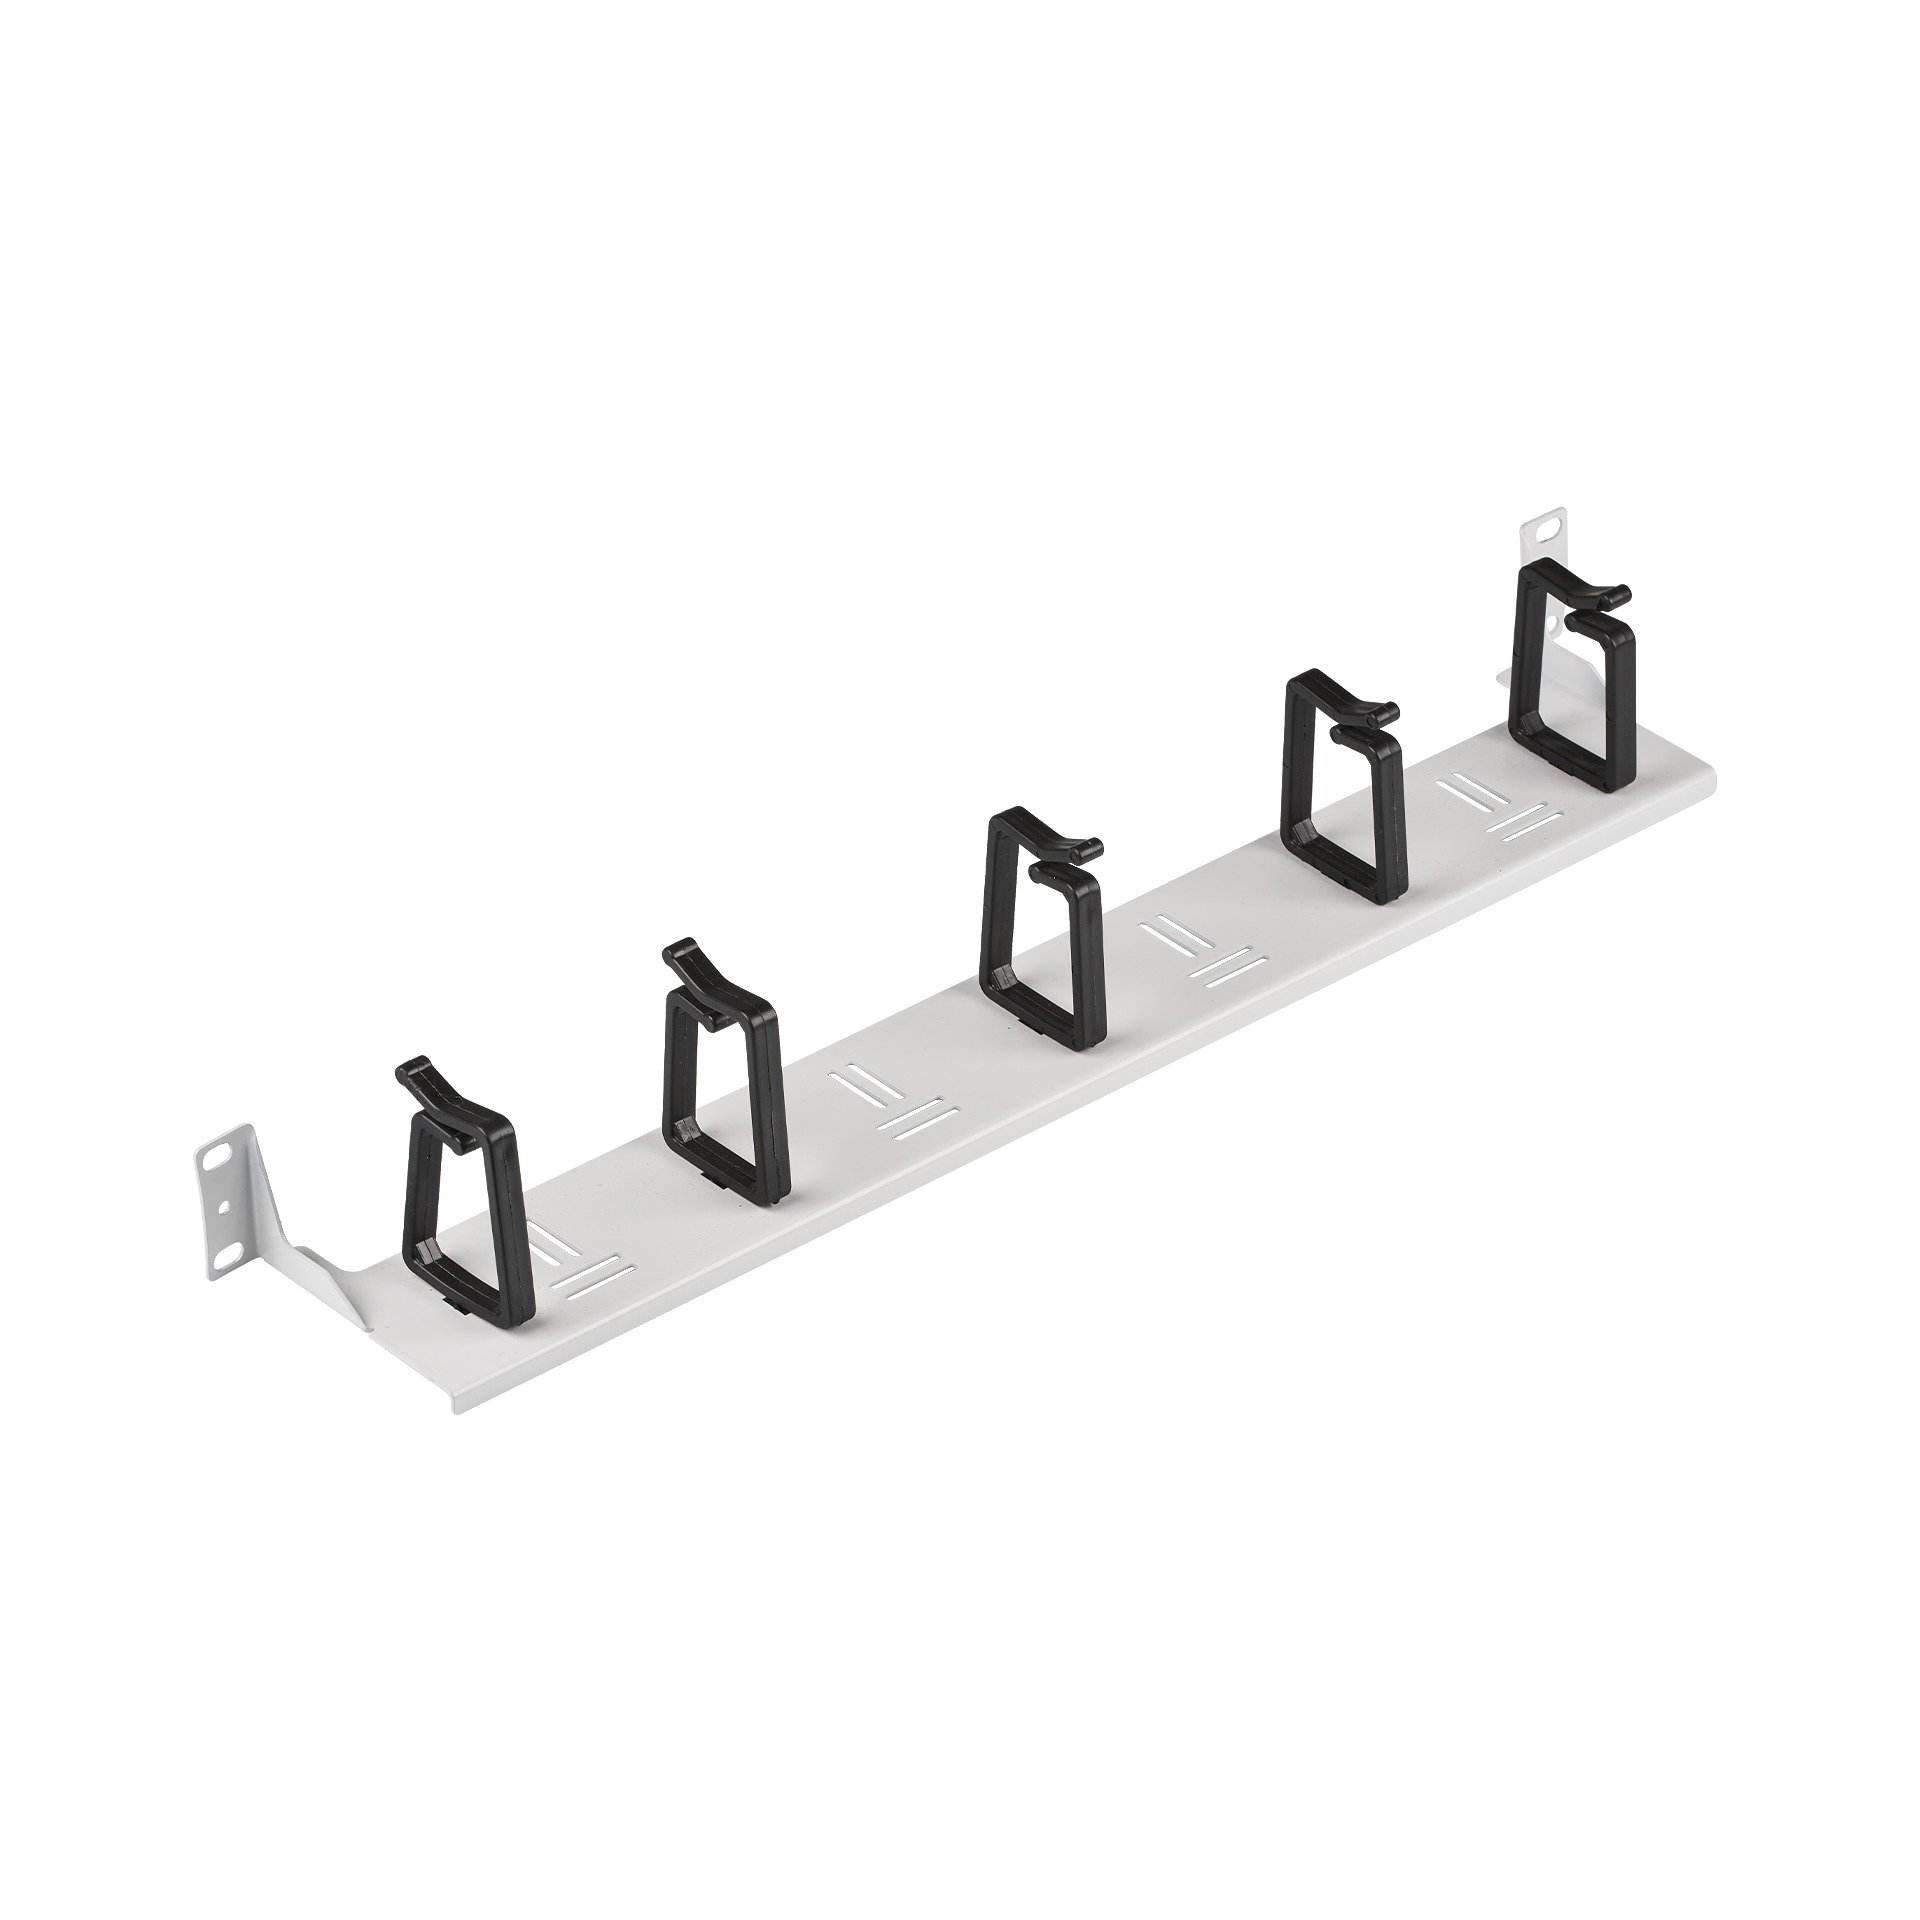 19" 0U Cable Routing Bracket, 5 Brackets, RAL9005